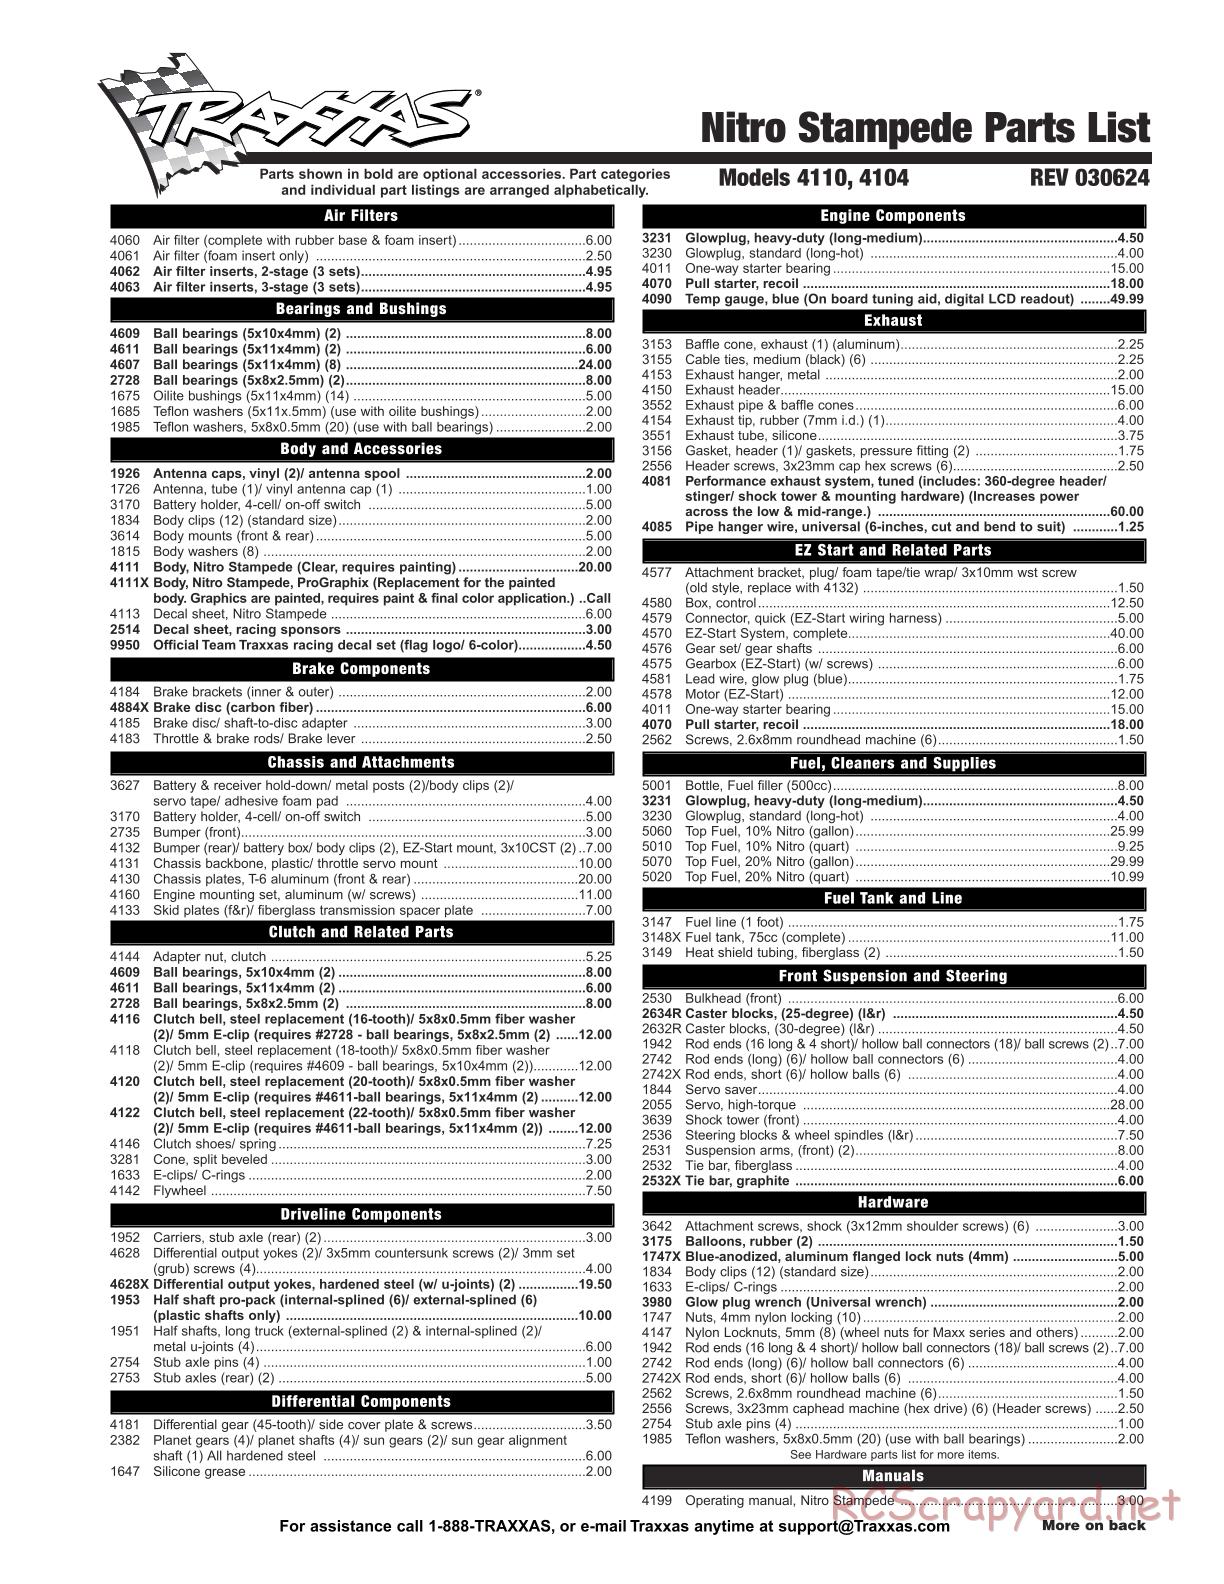 Traxxas - Nitro Stampede - Parts List - Page 1